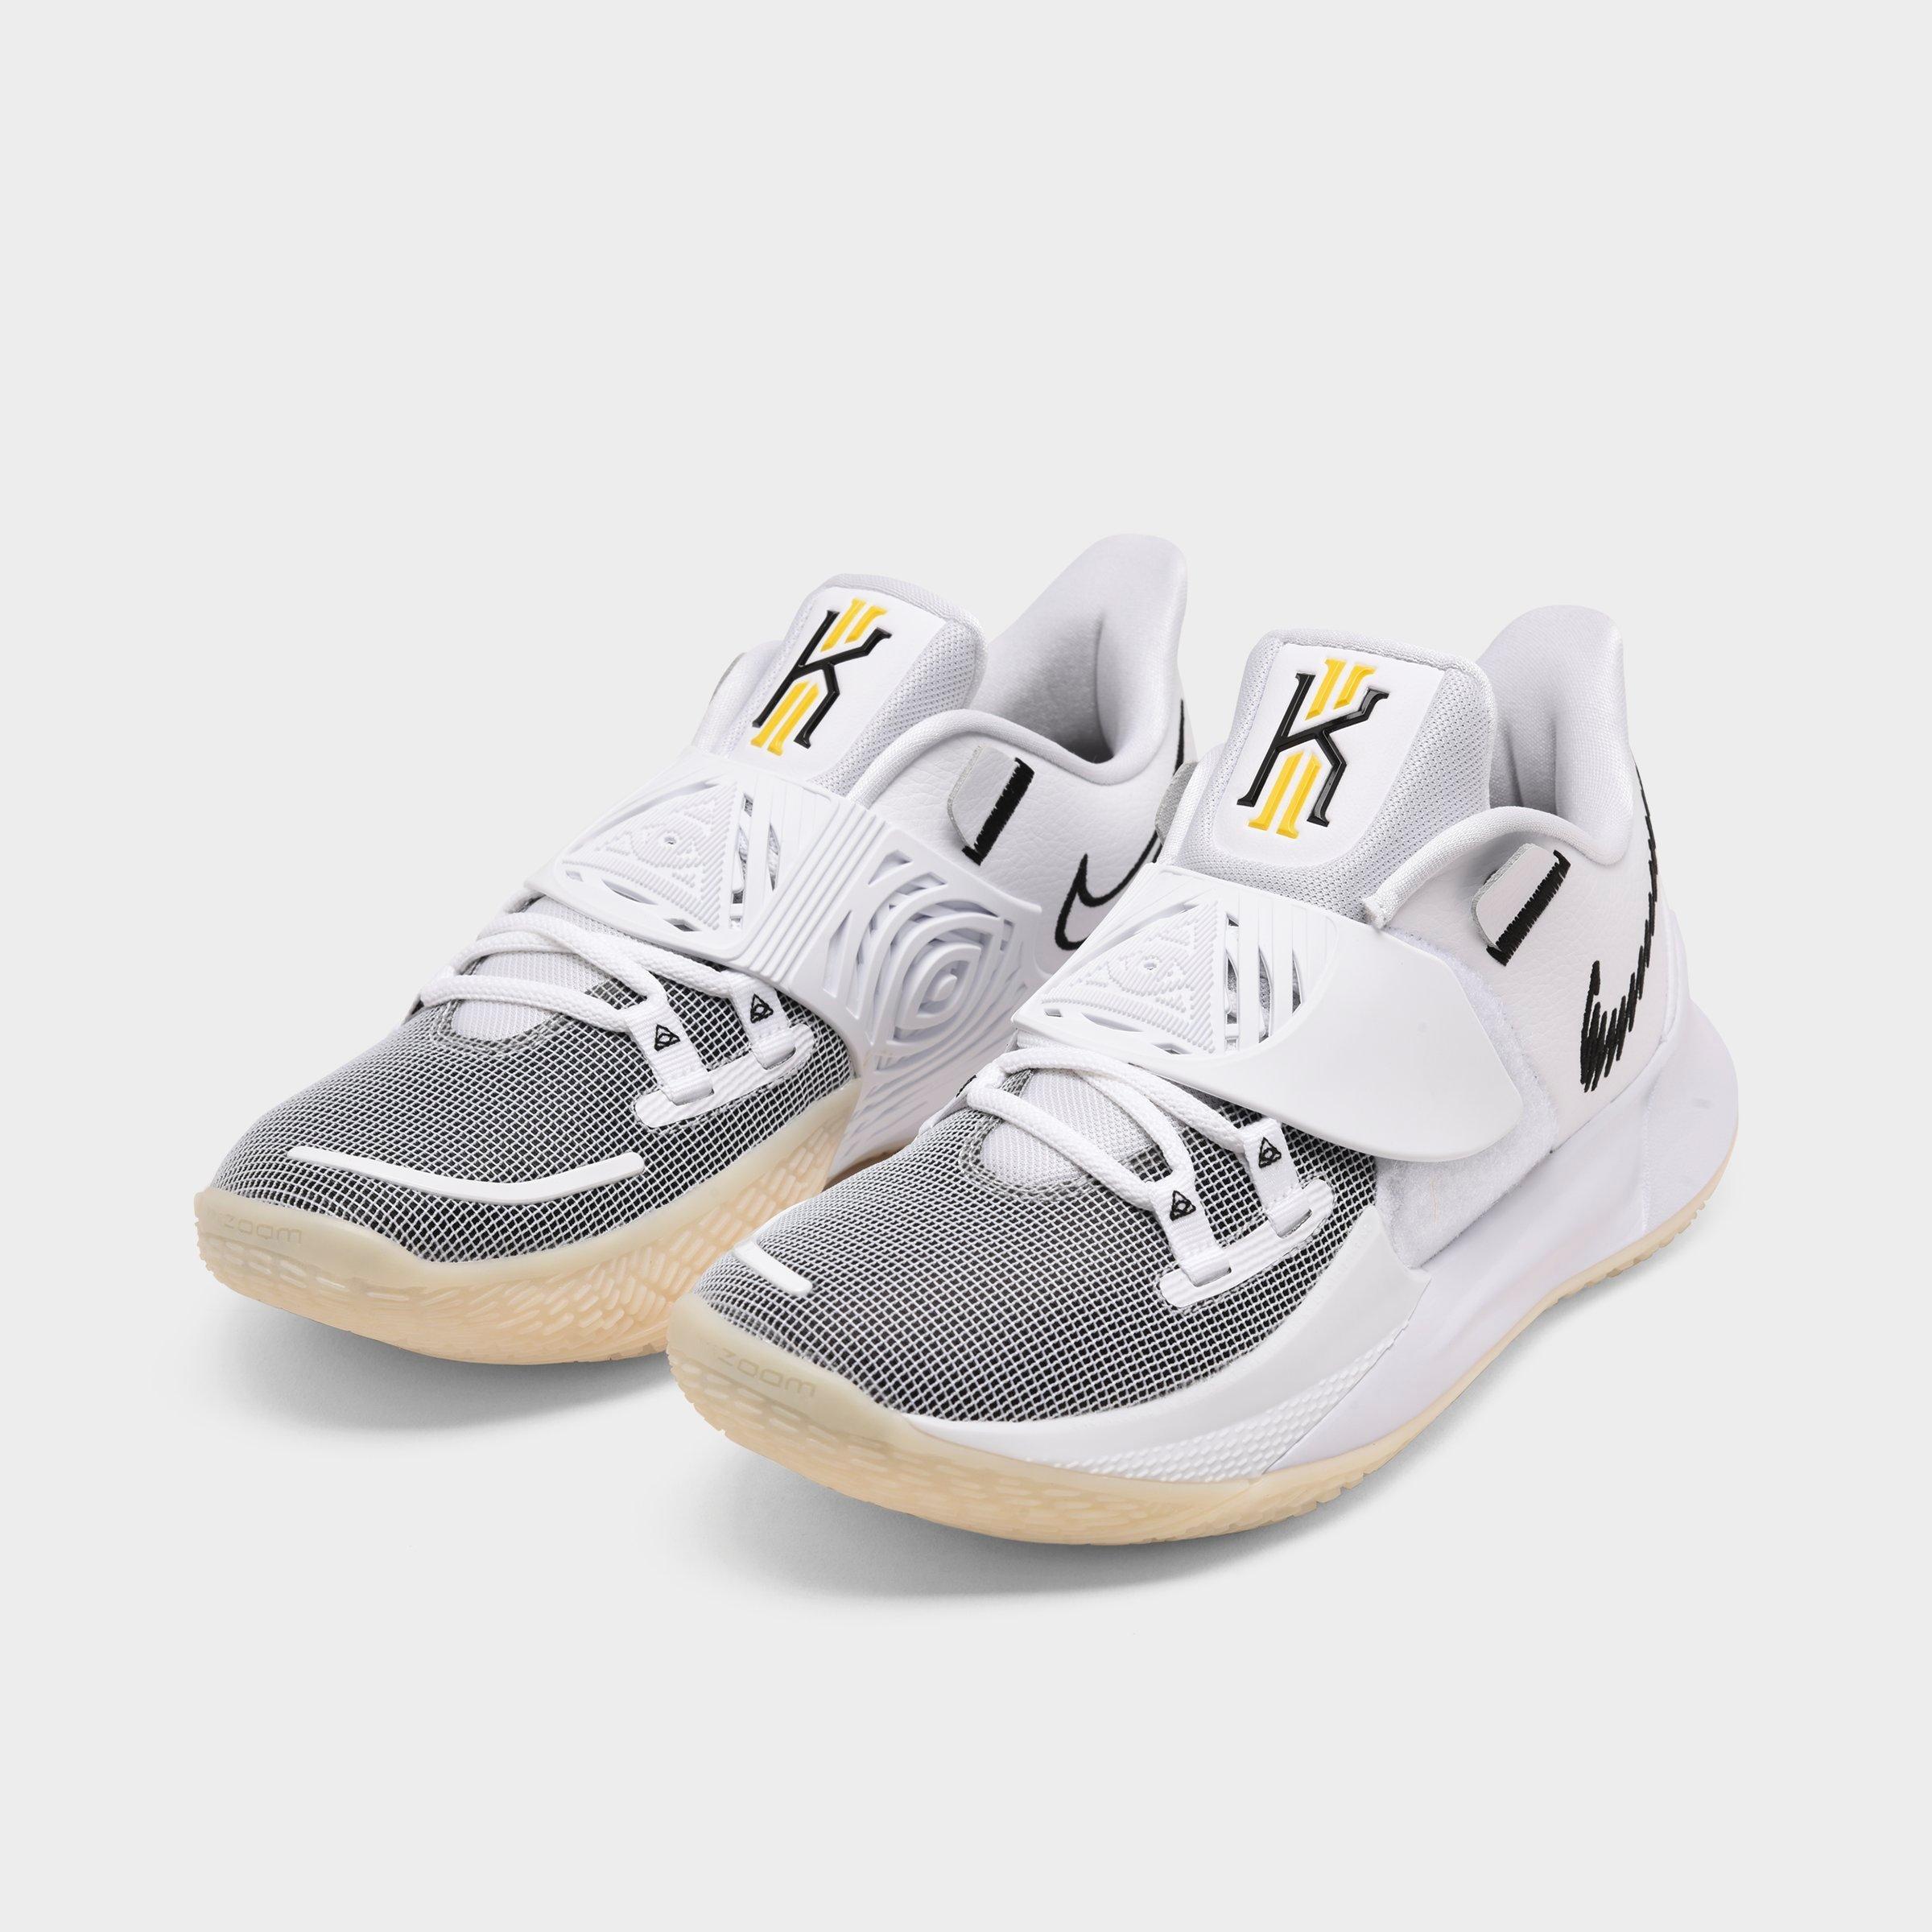 kyrie low shoes